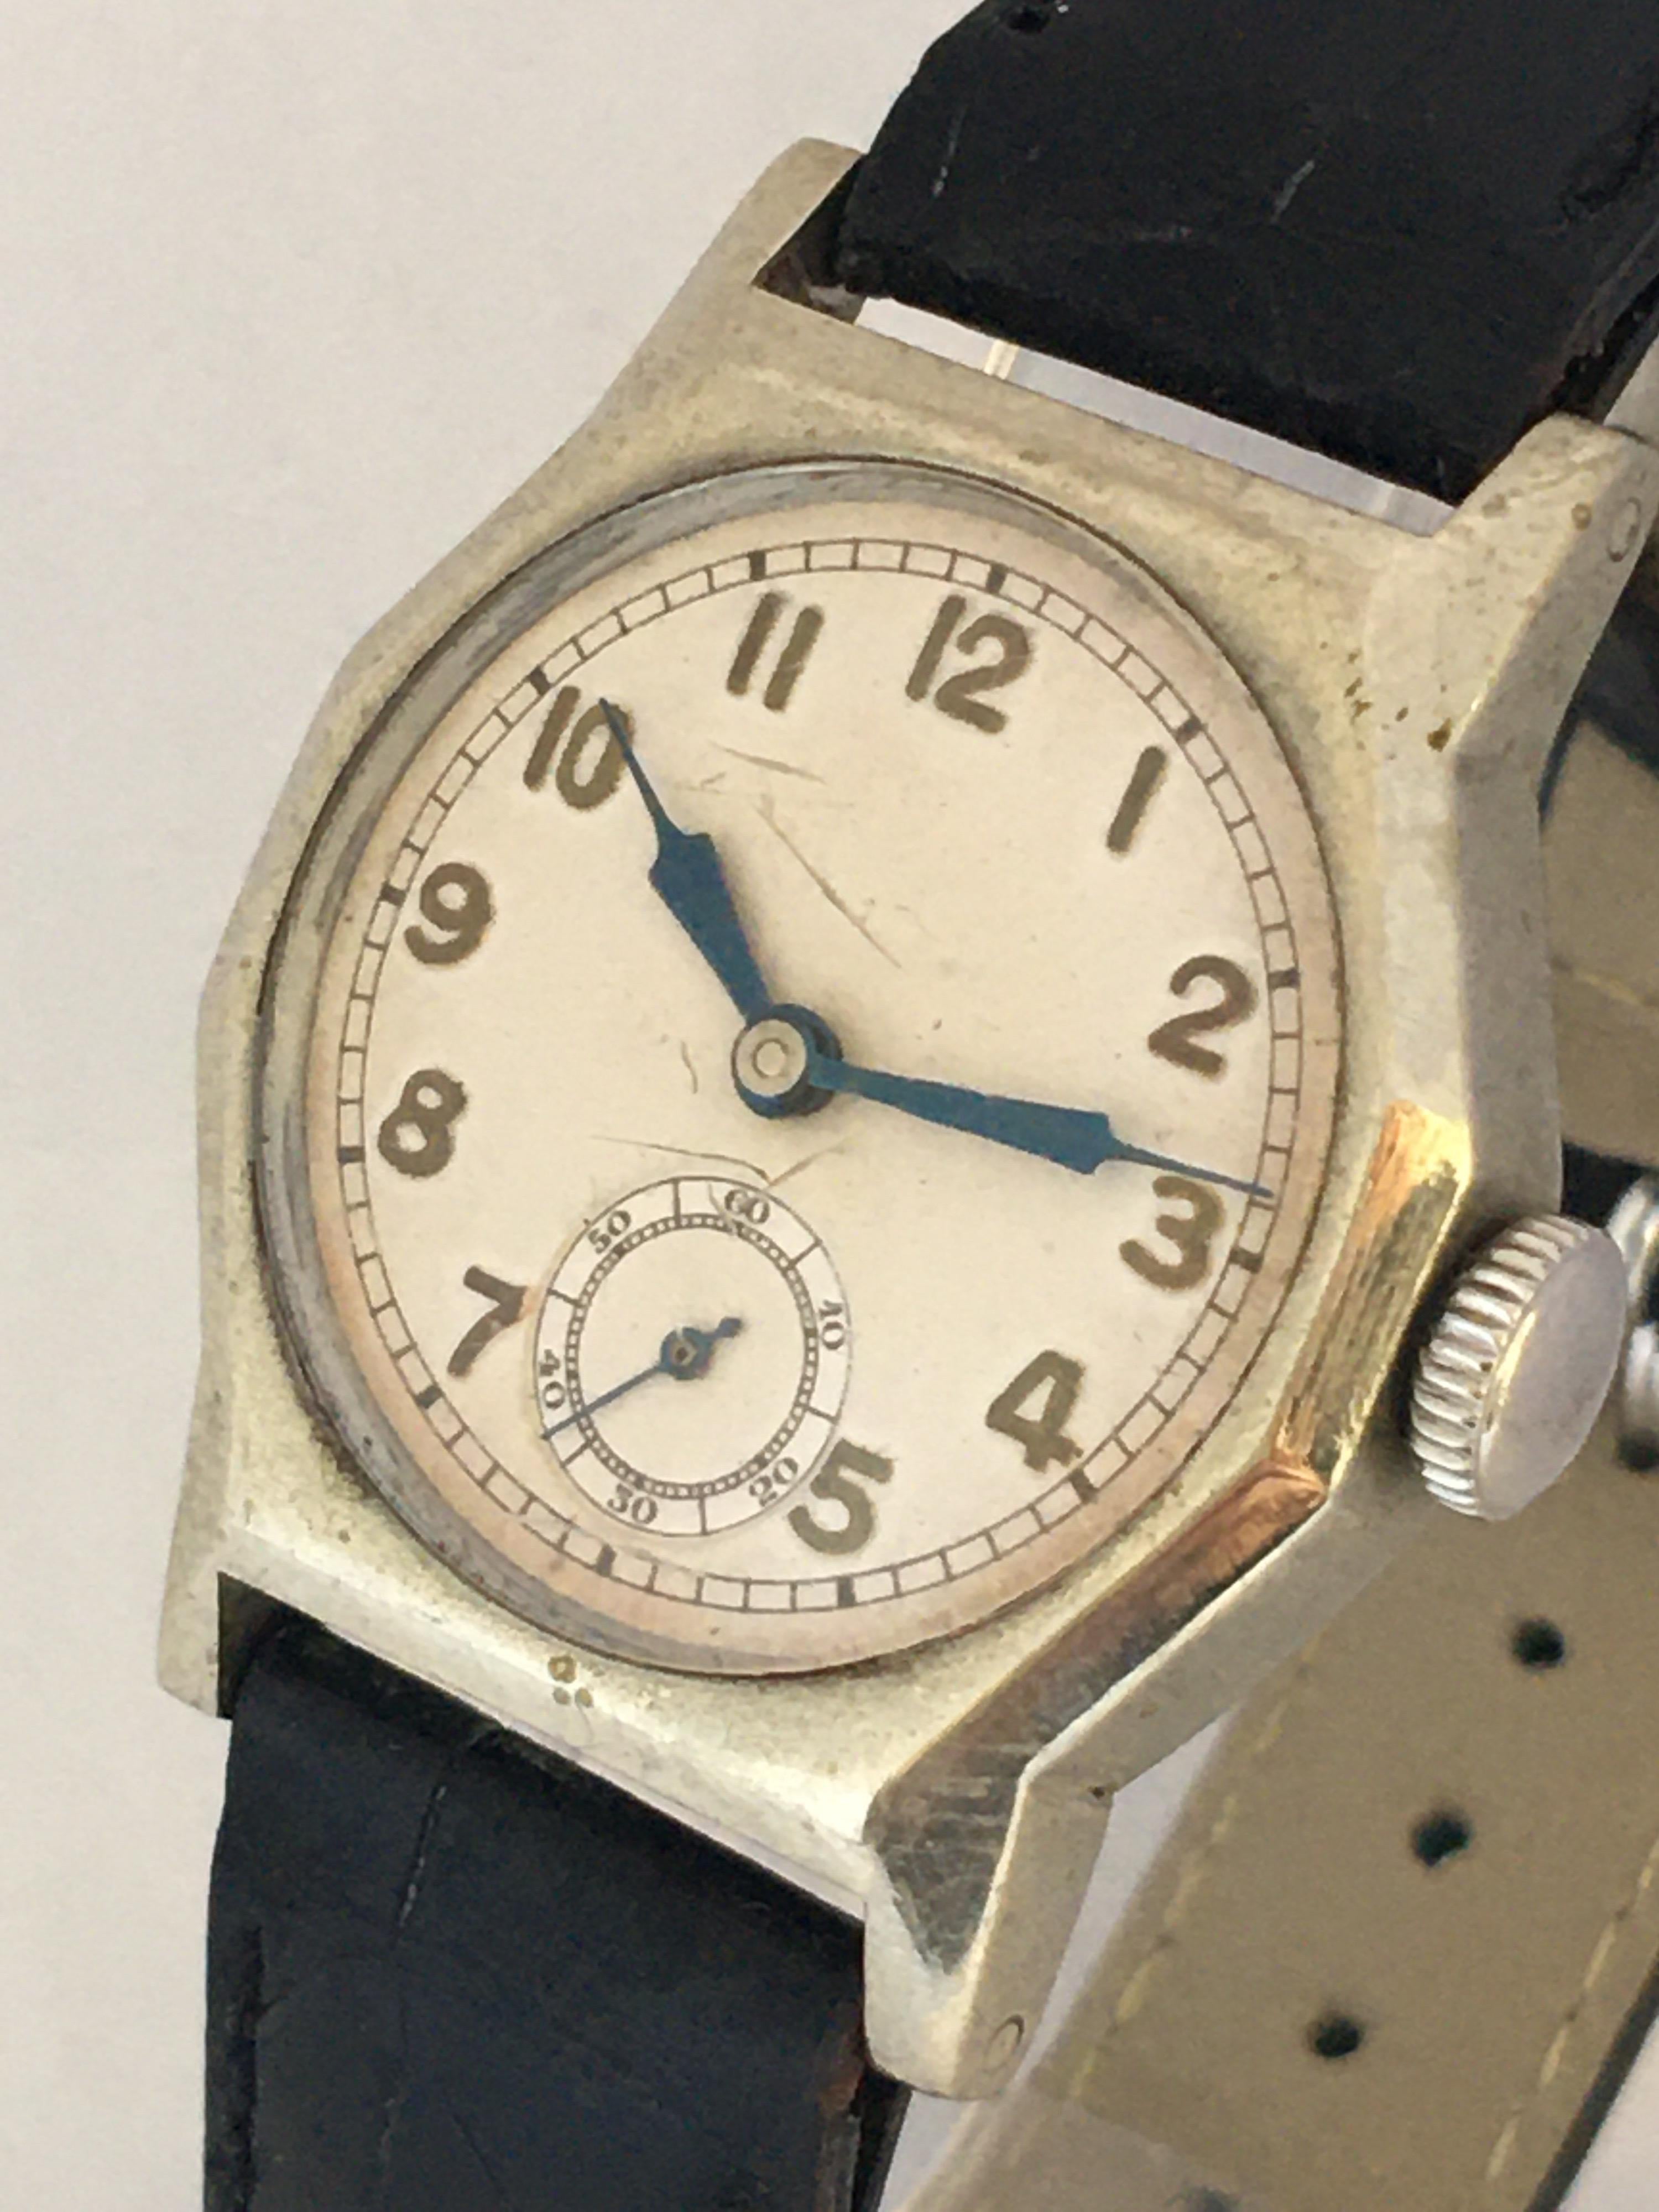 This beautiful pre-owned vintage hand-winding watch is working and it is ticking well and keeps a good time with its blue steeled hands and white dial. Visible signs of wear and ageing with some scratches on the glass and also on the watch case. It